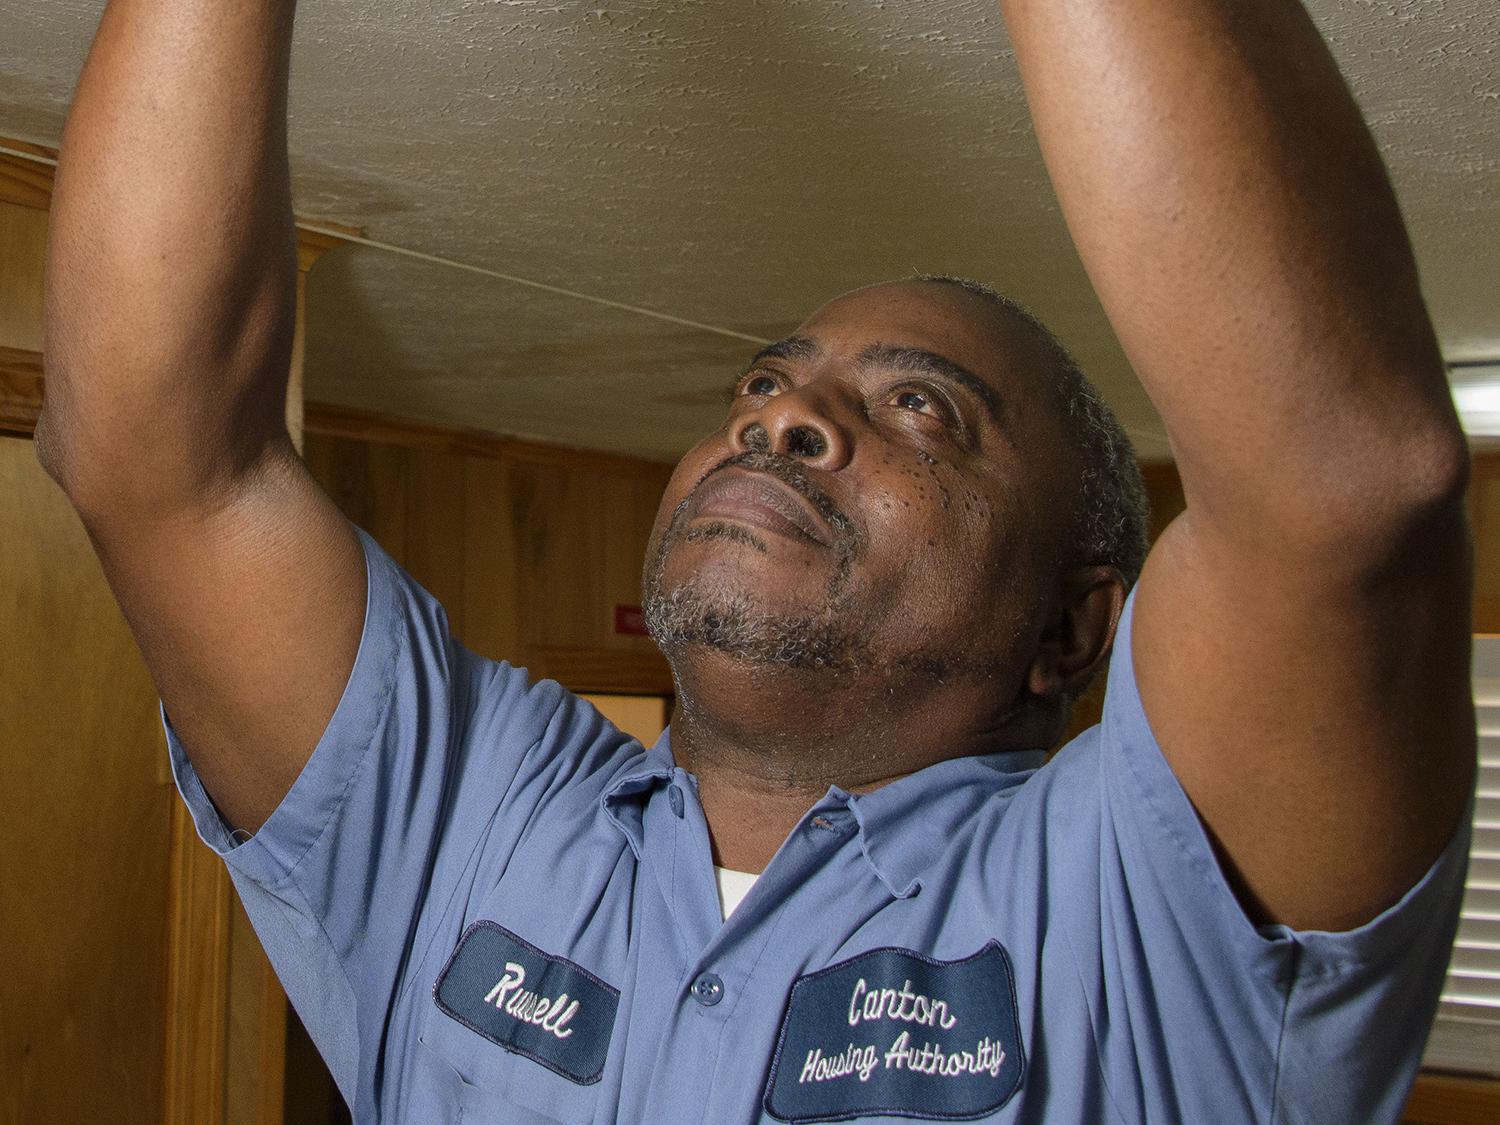 Russell Carroll, a maintenance supervisor with the Canton Housing Authority in Canton, Mississippi, checks batteries in a smoke detector in one of the housing units he services. Carroll participated in a Healthy Homes Initiative training and shares information with his colleagues and clients to help them improve their environments. (File photo by MSU Extension Service/Kevin Hudson)